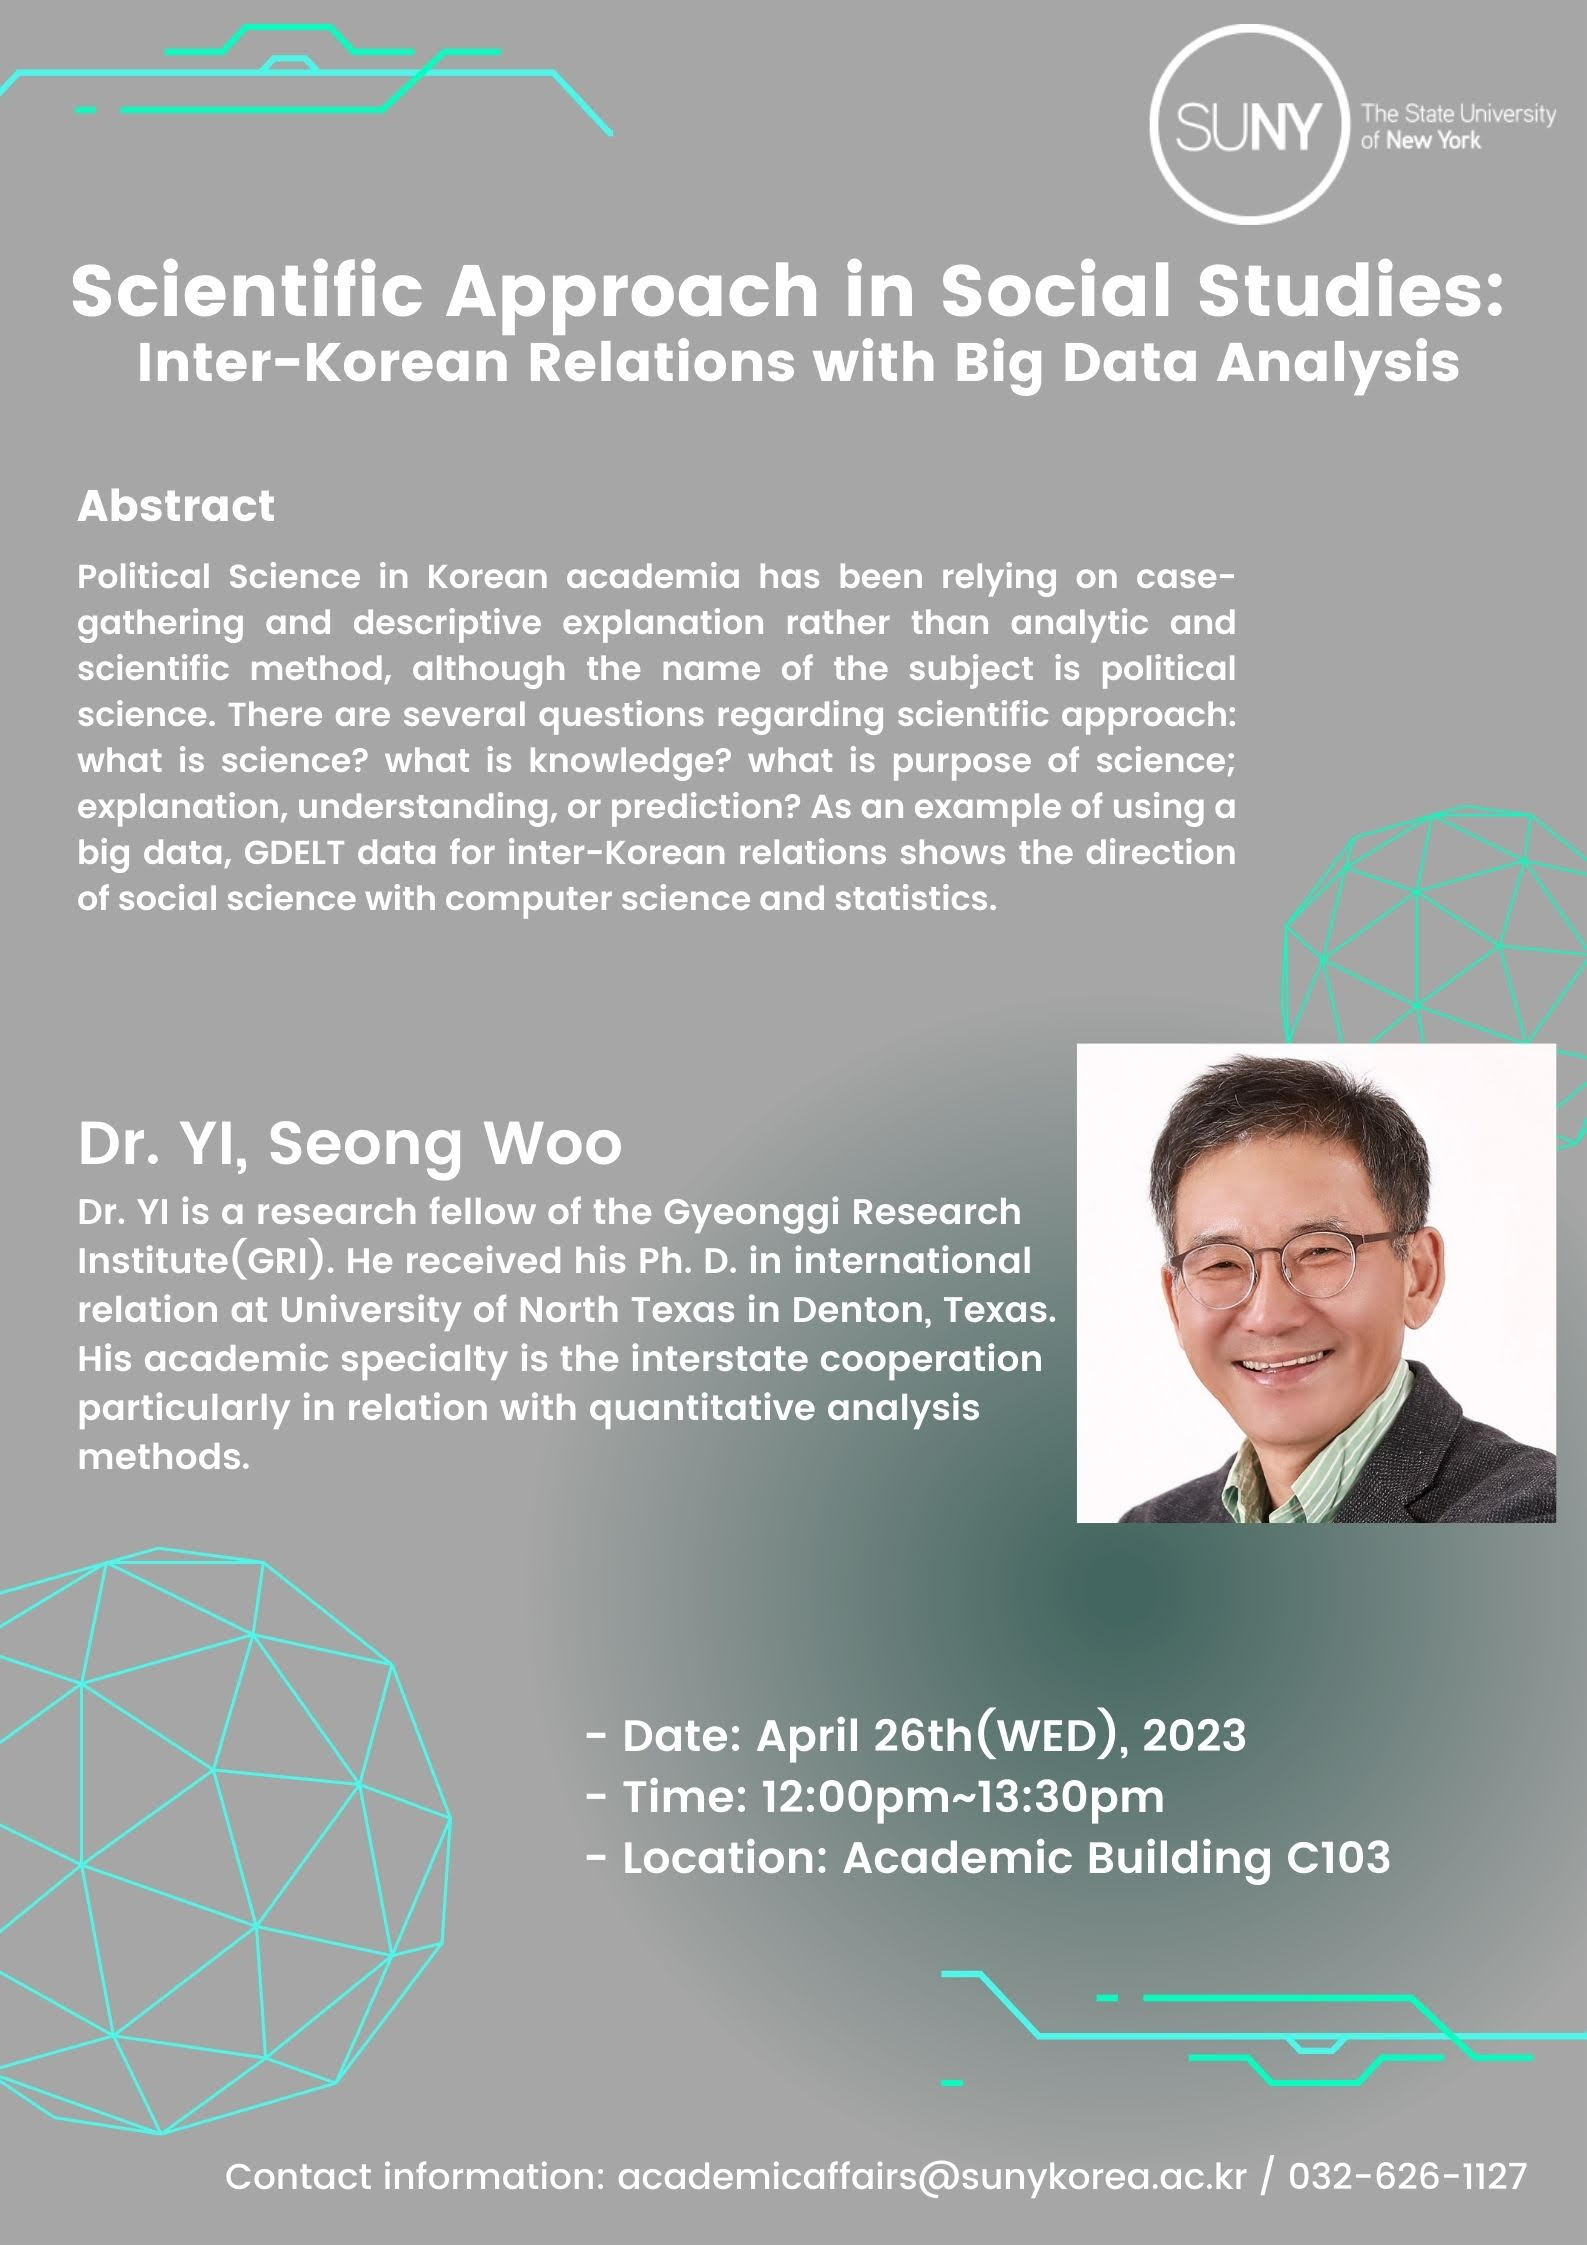 SUNY The State University of New York. Scientific Approach in Social Studies: Inter-Korean Relations with Big Data Analysis. Abstract: Political Science in Korean academia has been relying on case-gathering and descriptive explanation rather than analytic and scientific method, although the name of the subject is political science. There are several questions regarding scientific approach: what is science? what is knowledge? what is purpose of science; explanation, understanding, or prediction? As an example of using a big data, GDELT data for inter-Korean relations shows the direction of social science with computer science and statistics. Dr. YI, Seong Woo Dr. YI is a research fellow of the Gyeonggi Research Institute(GRI). He received his Ph. D. in international relation at University of North Texas in Denton, Texas. His academic specialty is the interstate cooperation particularly in relation with quantitative analysis methods. -Date: April 26th(WED), 2023. -Time: 12:00pm~13:30pm. -Location: Academic Building C103 / Contact information: academicaffairs@sunykorea.ac.kr / 032-626-1127